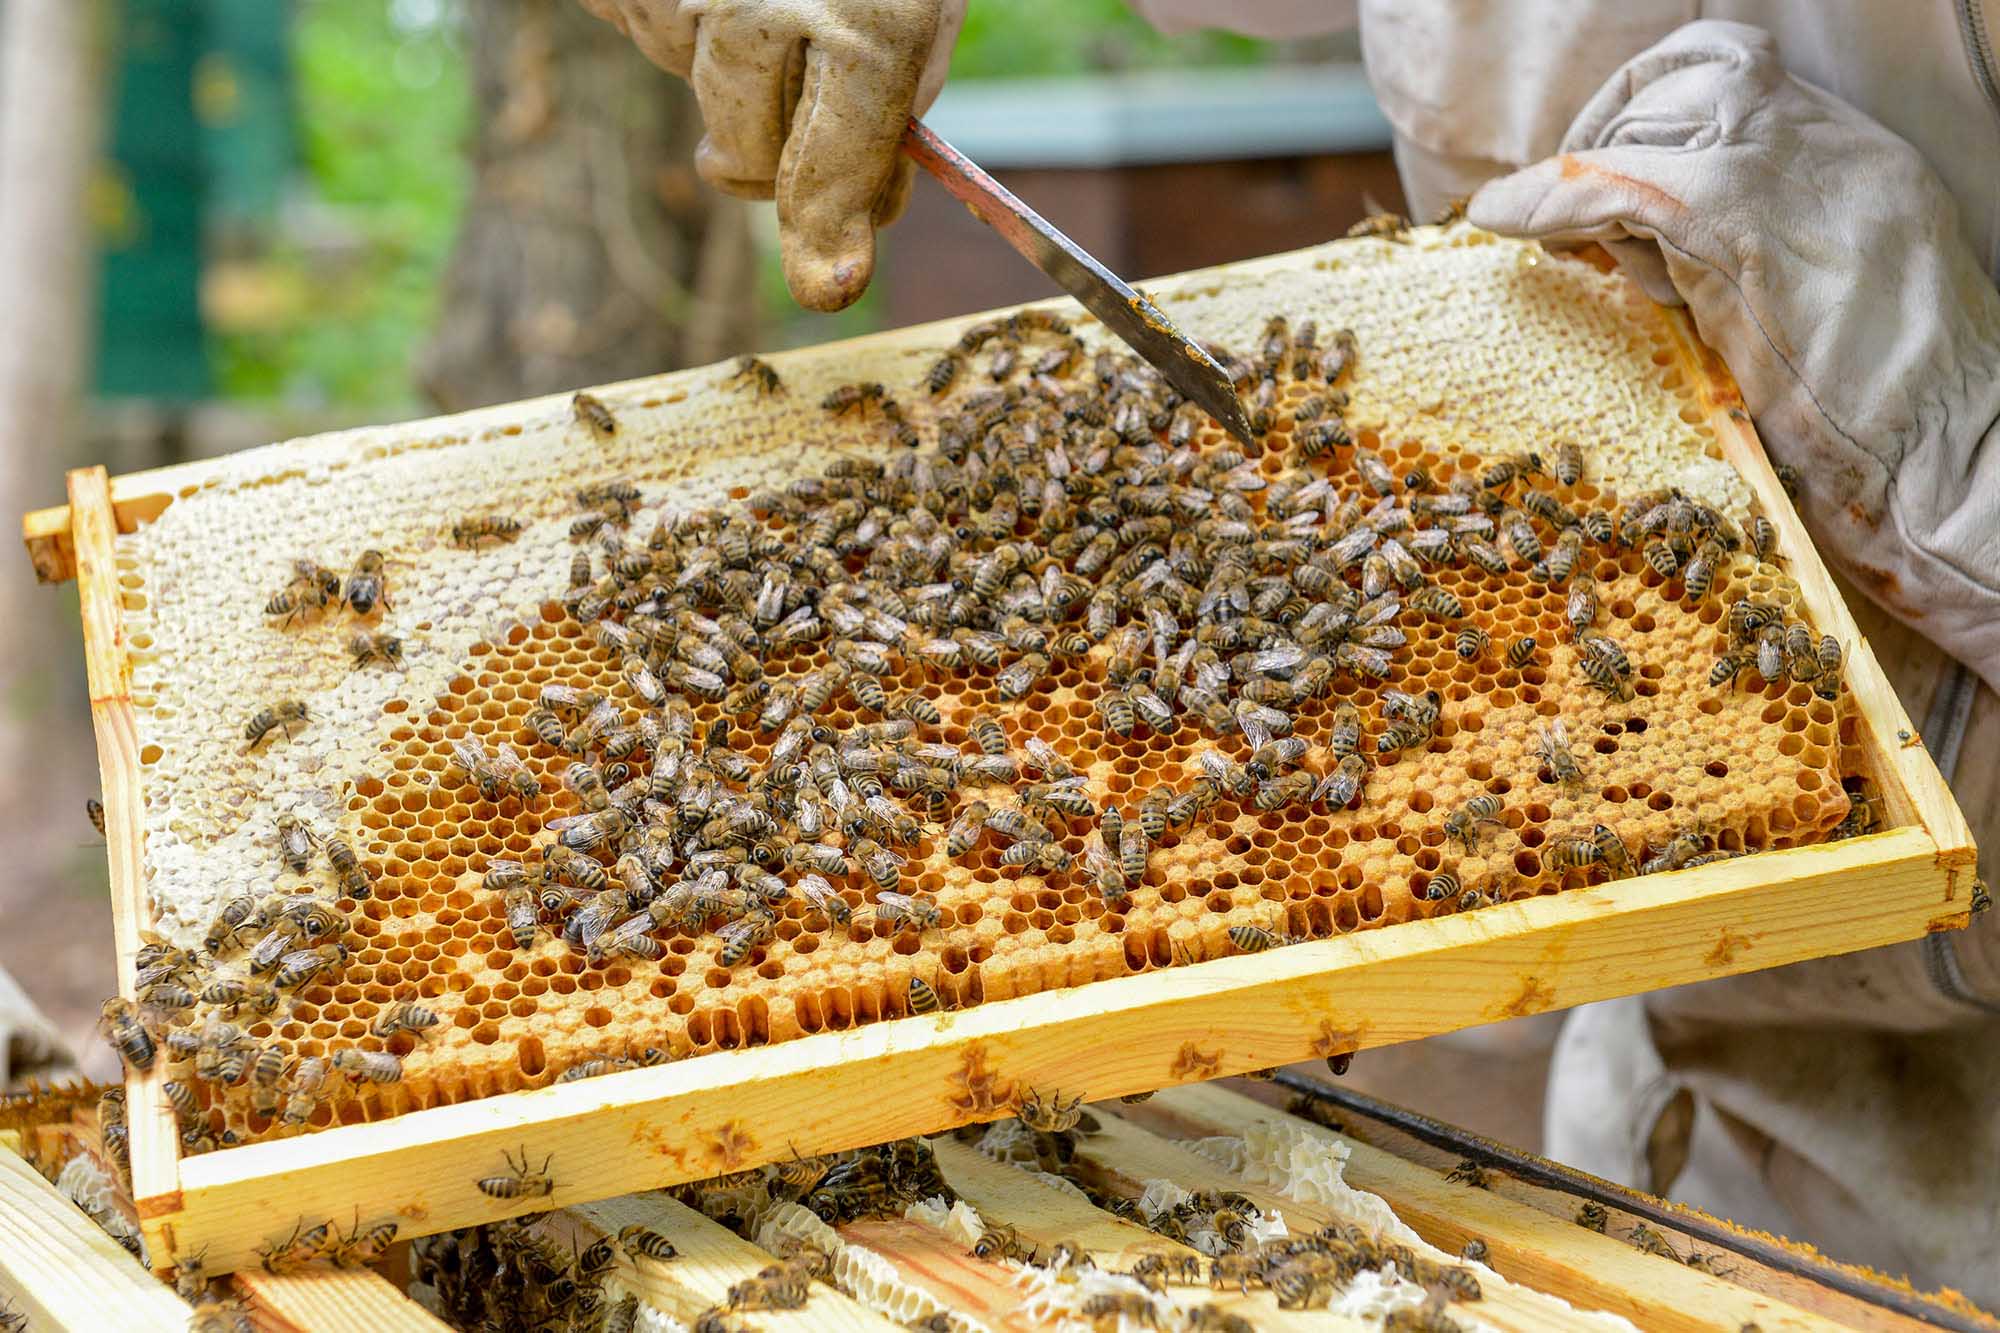 Honeybee Populations Could Be Wiped Out Worldwide…